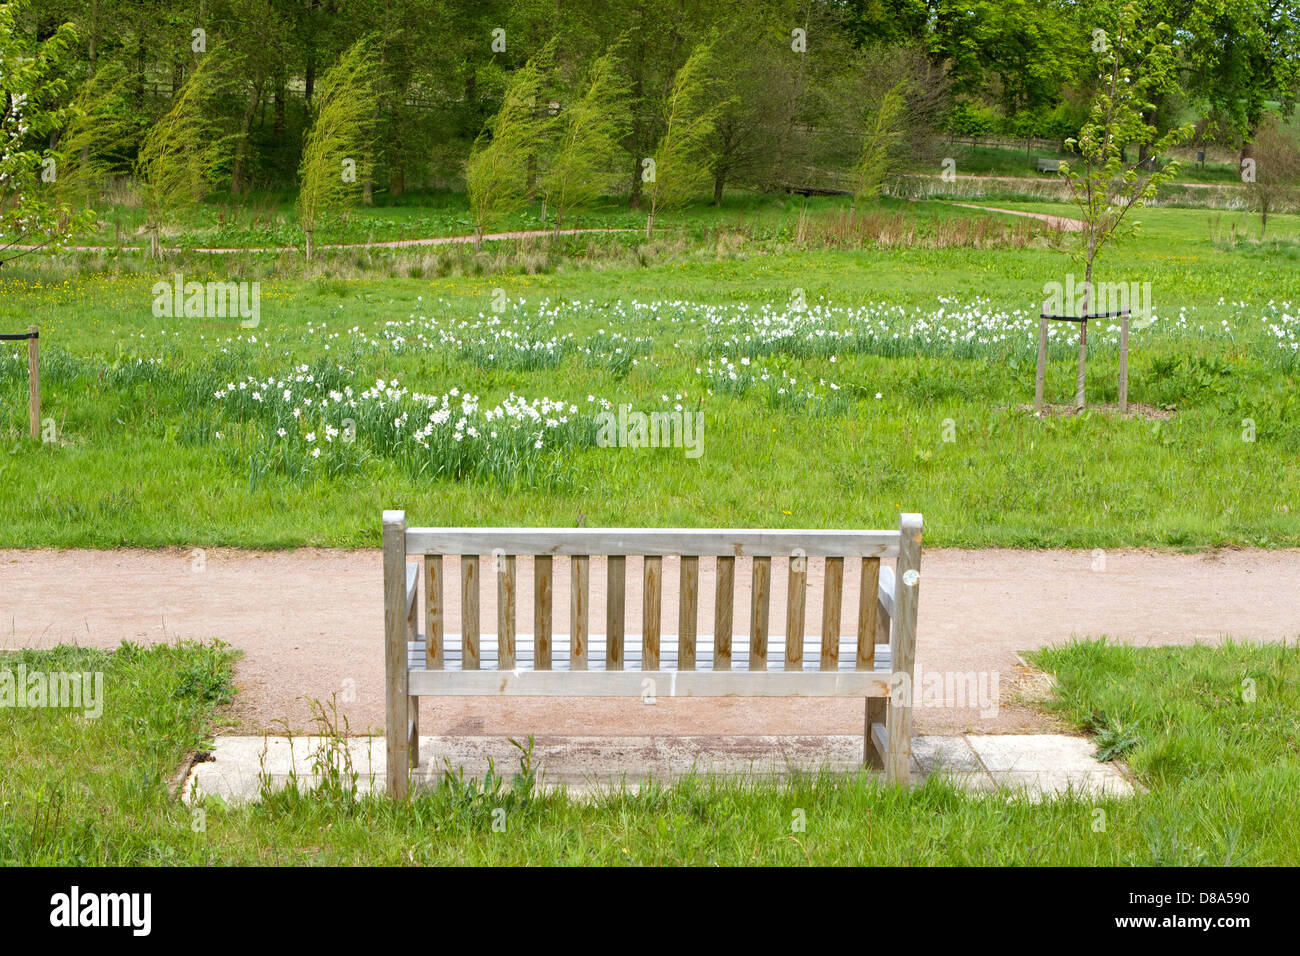 bench in an English Countryside scene Stock Photo